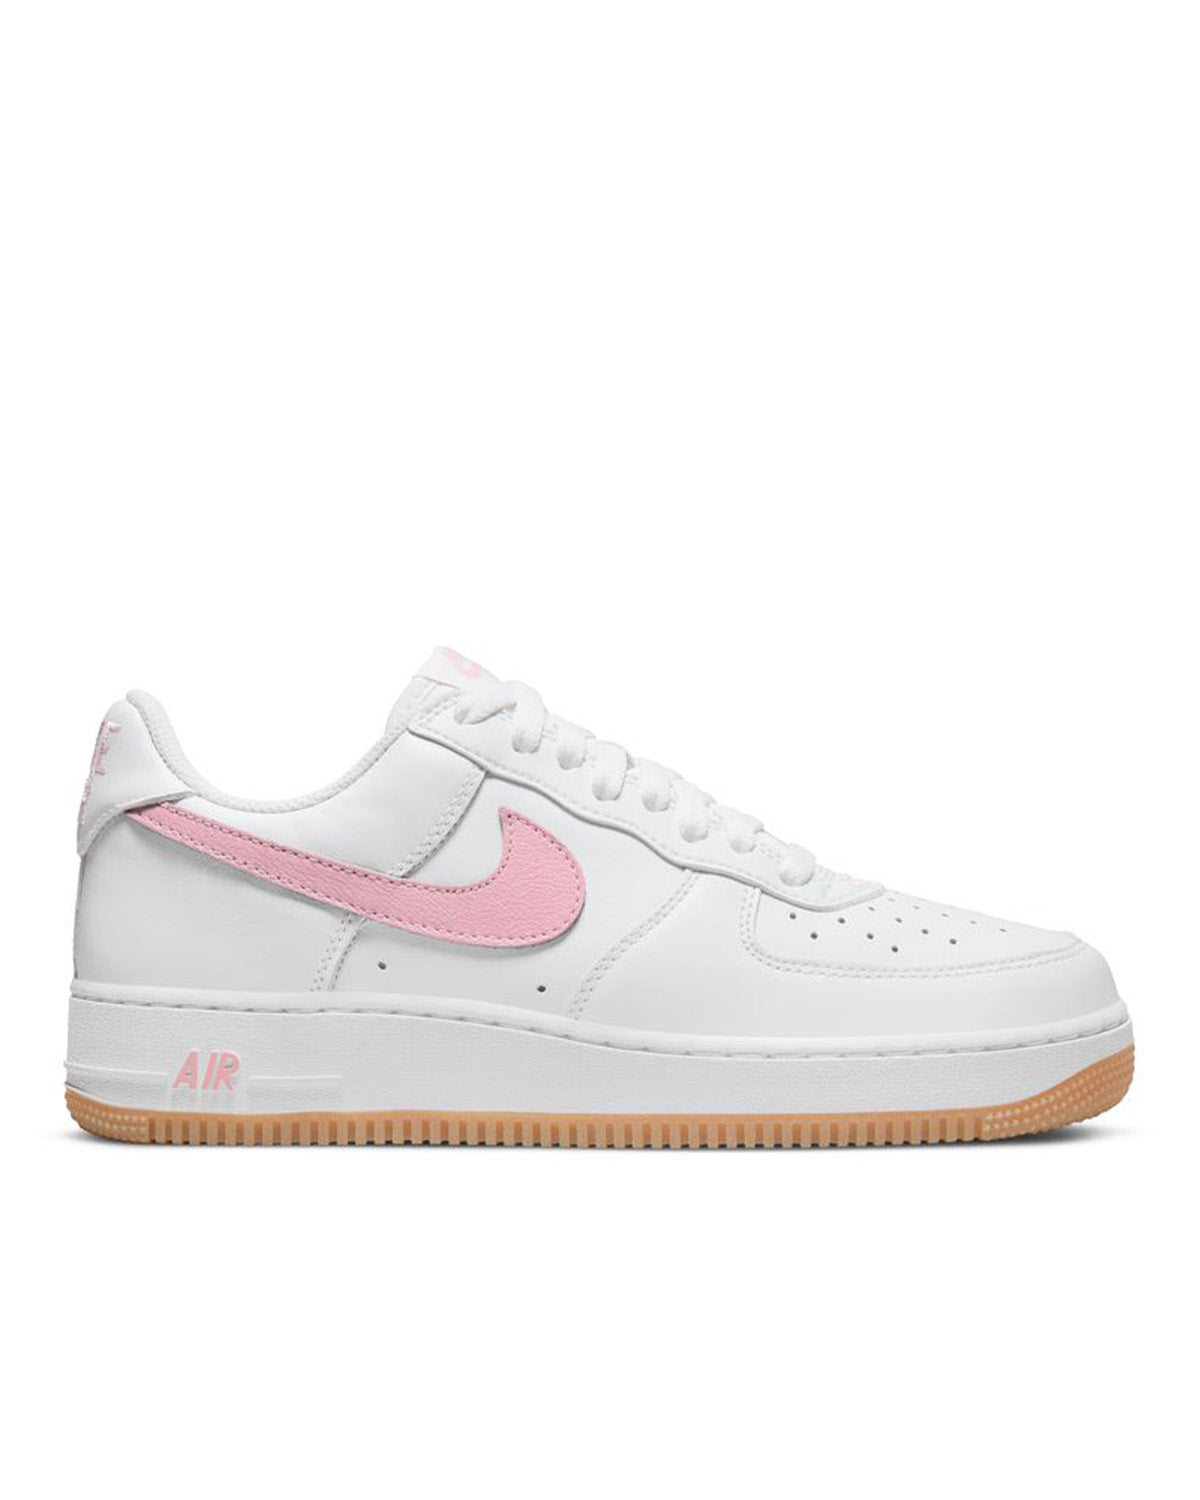 Air Force 1 Low Retro White/Pink/Gum Yellow